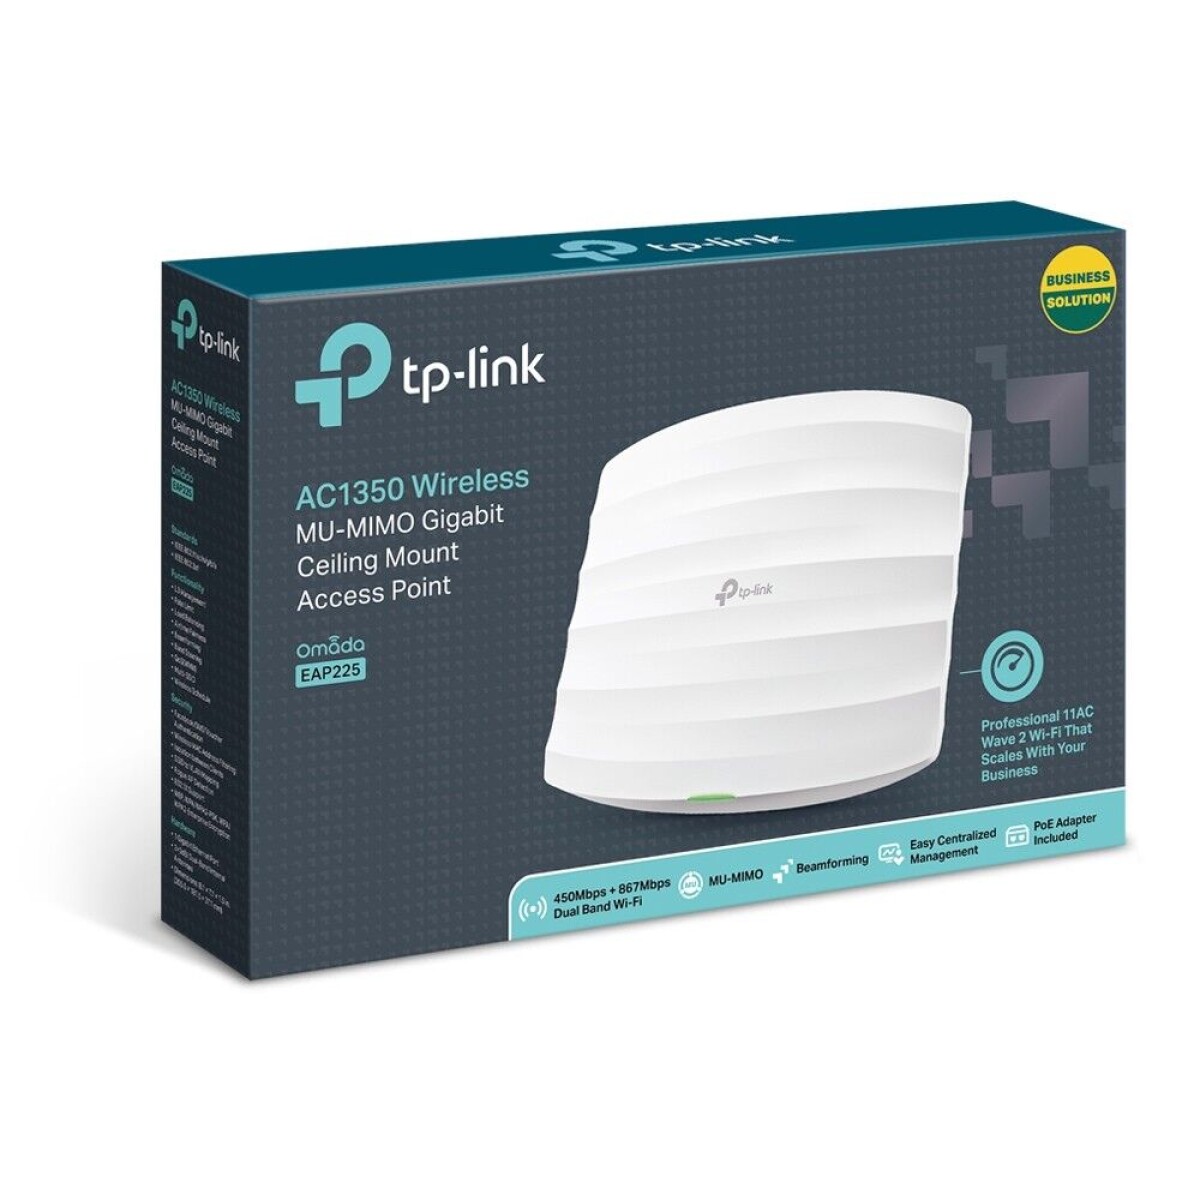 Red Inal - AP AC1350 EAP225 Tp-Link DualBand 1317MBps - 5476 